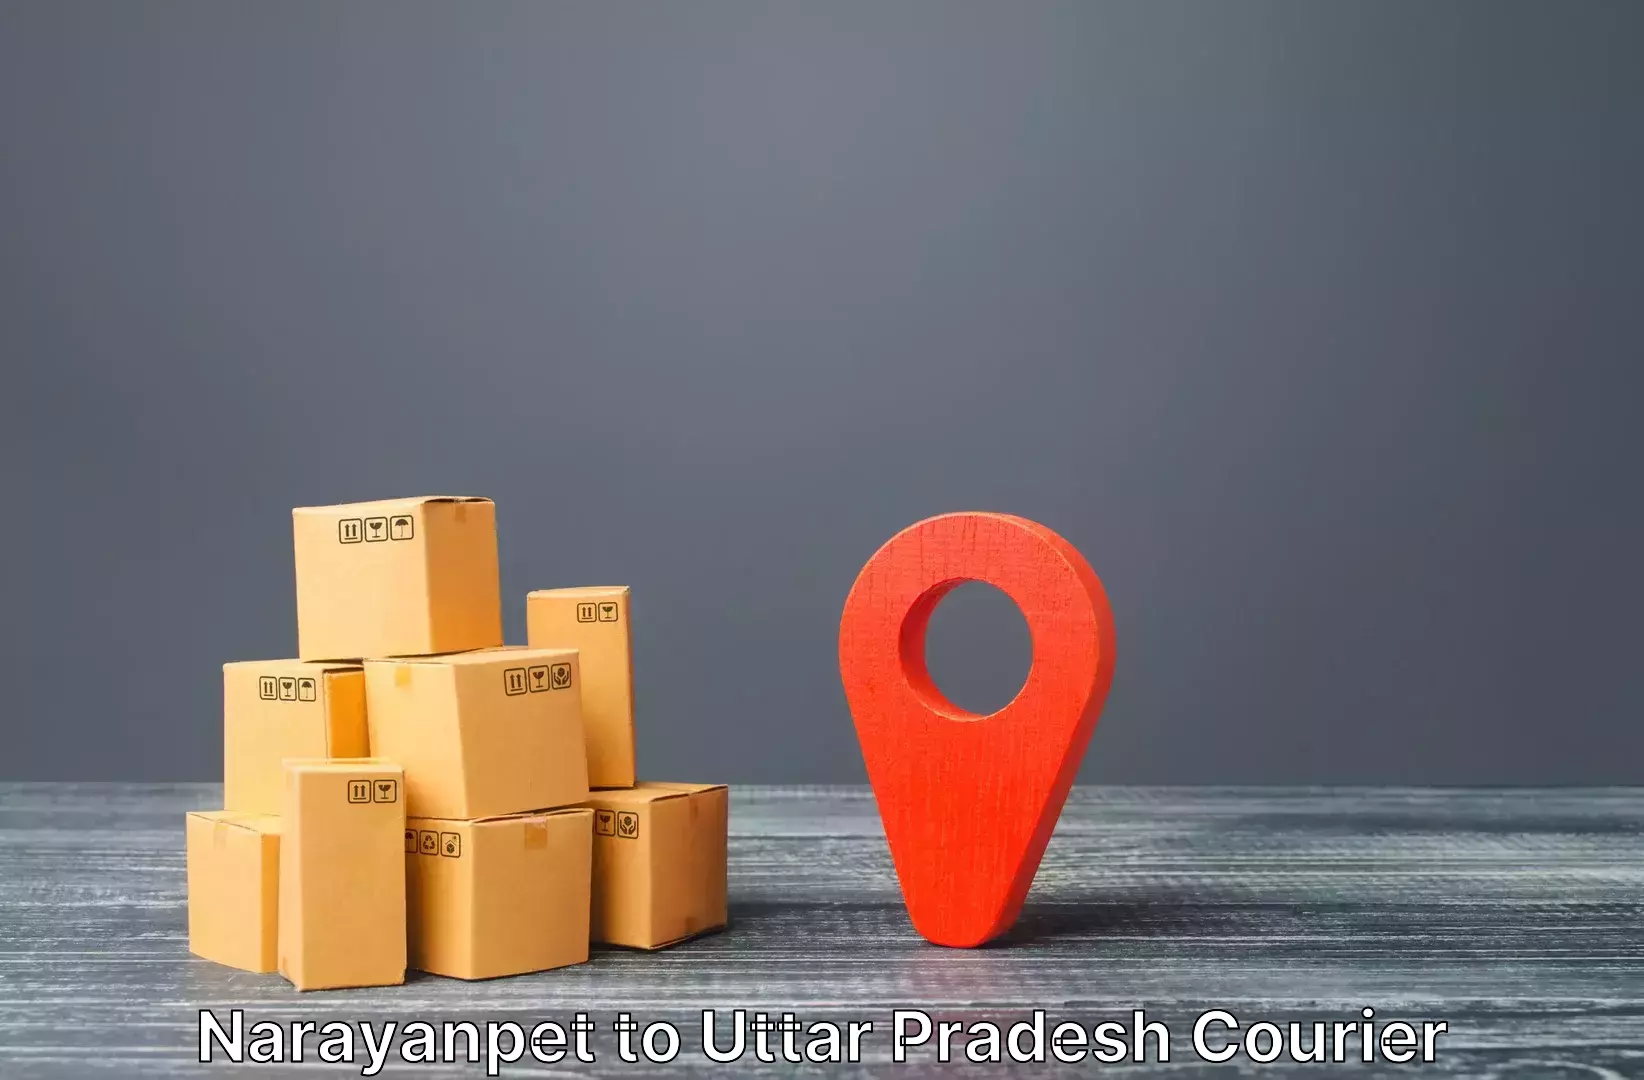 Baggage transport network Narayanpet to Agra